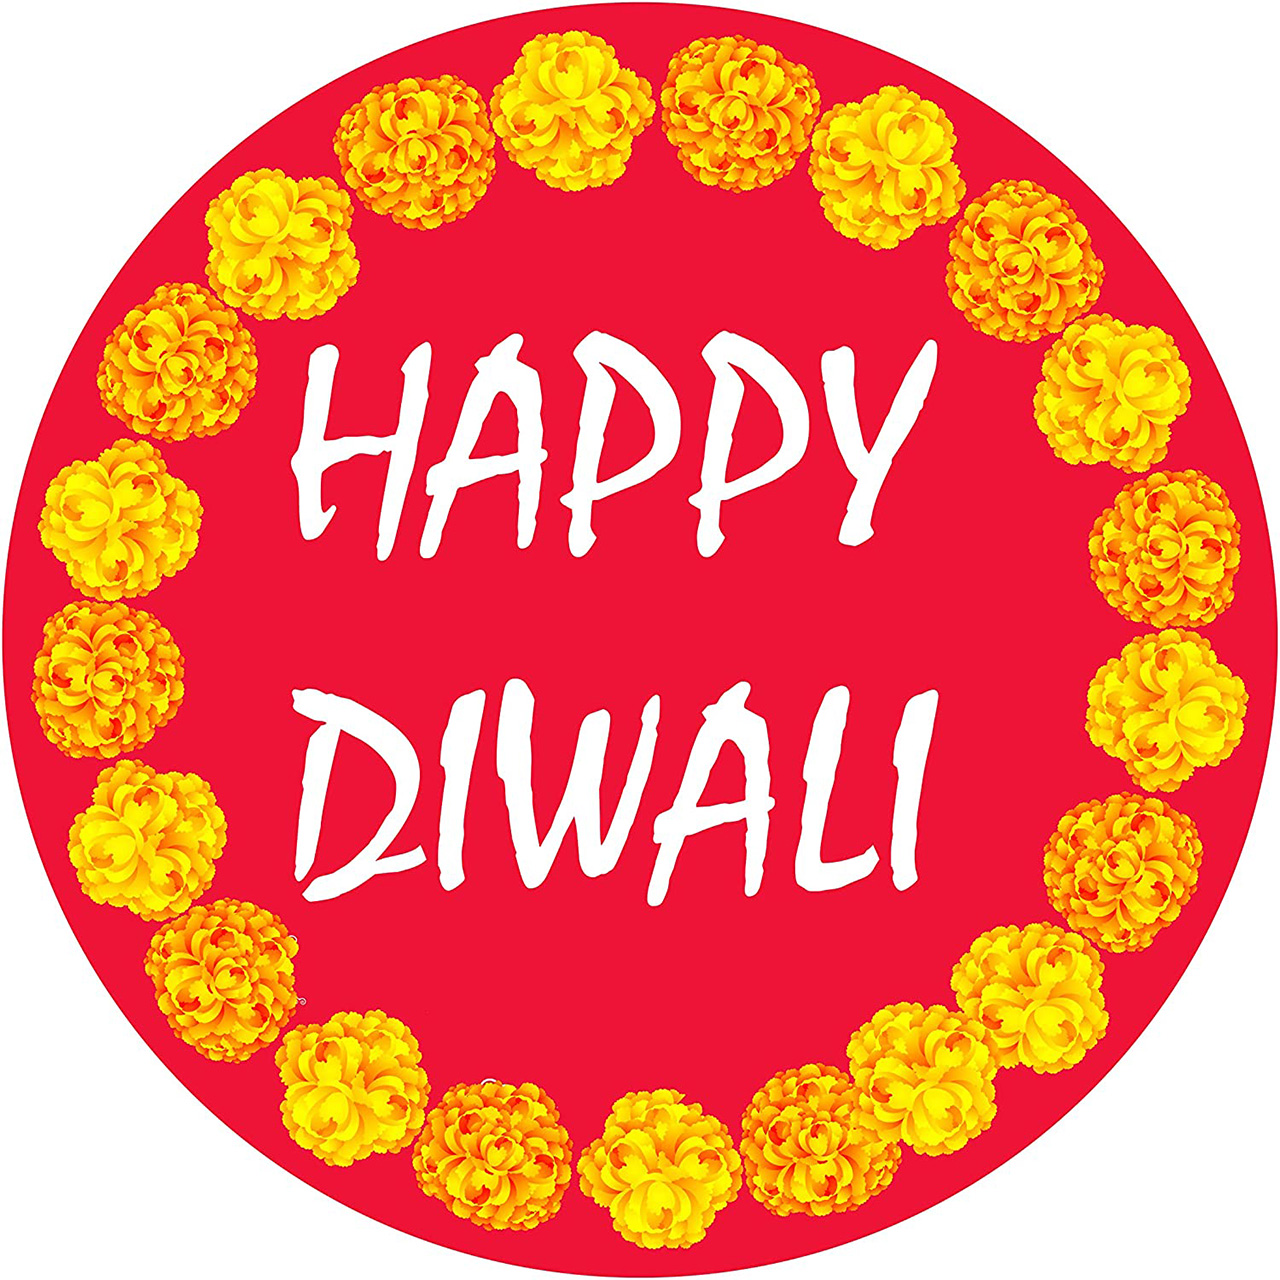 DIWALI STICKERS IDEAL FOR GIFT WRAPPING | DIWALI STICKERS FOR GIFT BAG | HAPPY DIWALI VINYL STICKER (Copy)